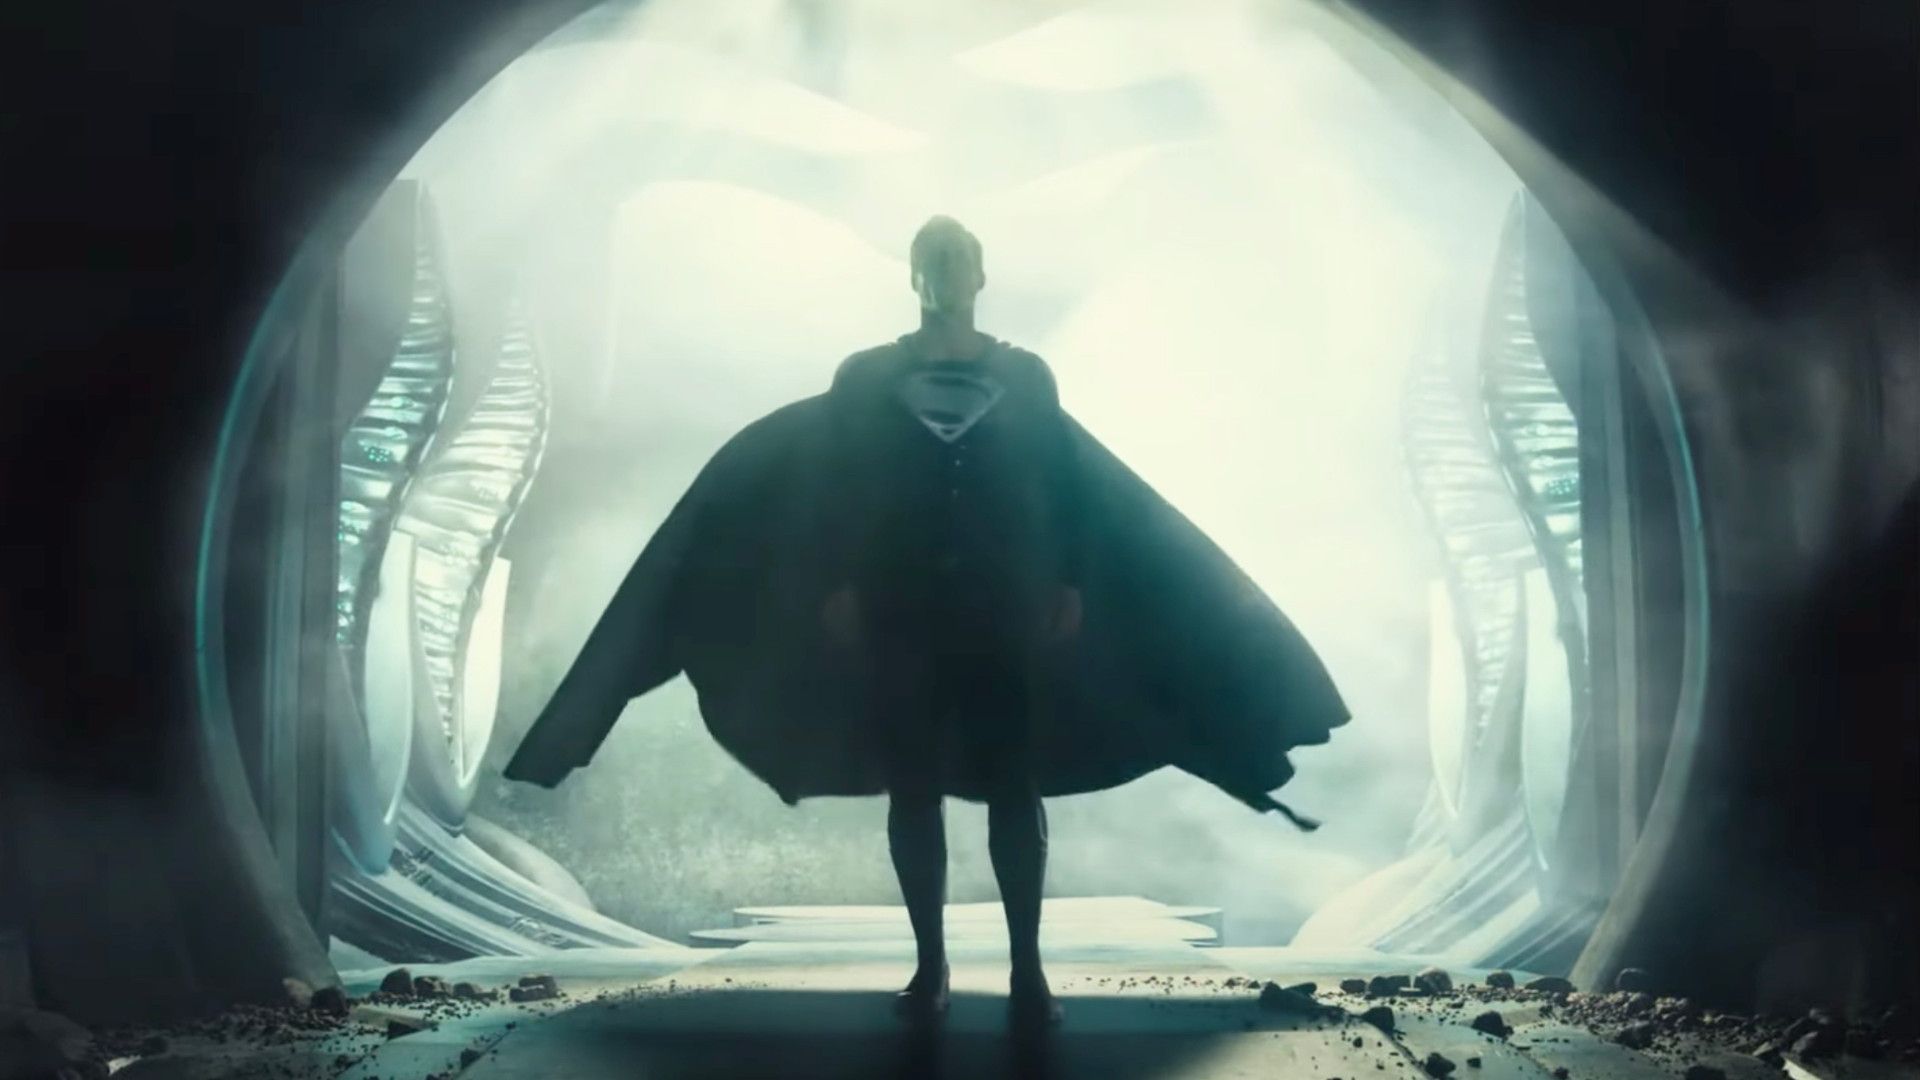 Zack Snyder's Justice League trailer revealed at DC FanDome and shows black suit Superman in action